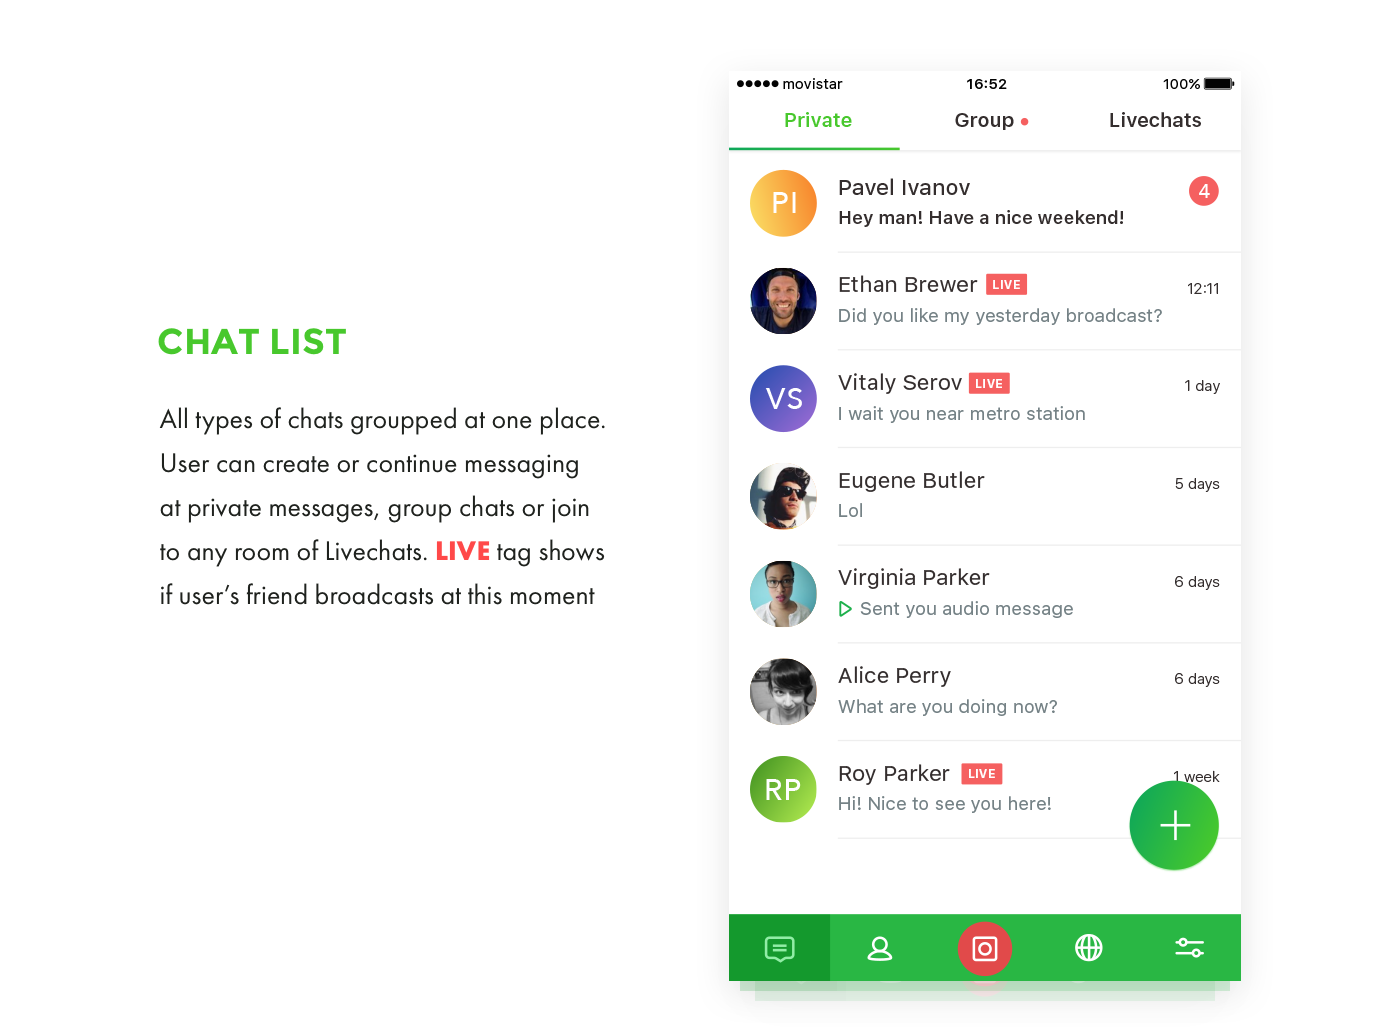 ICQ App Redesign Concept from Mail.ru